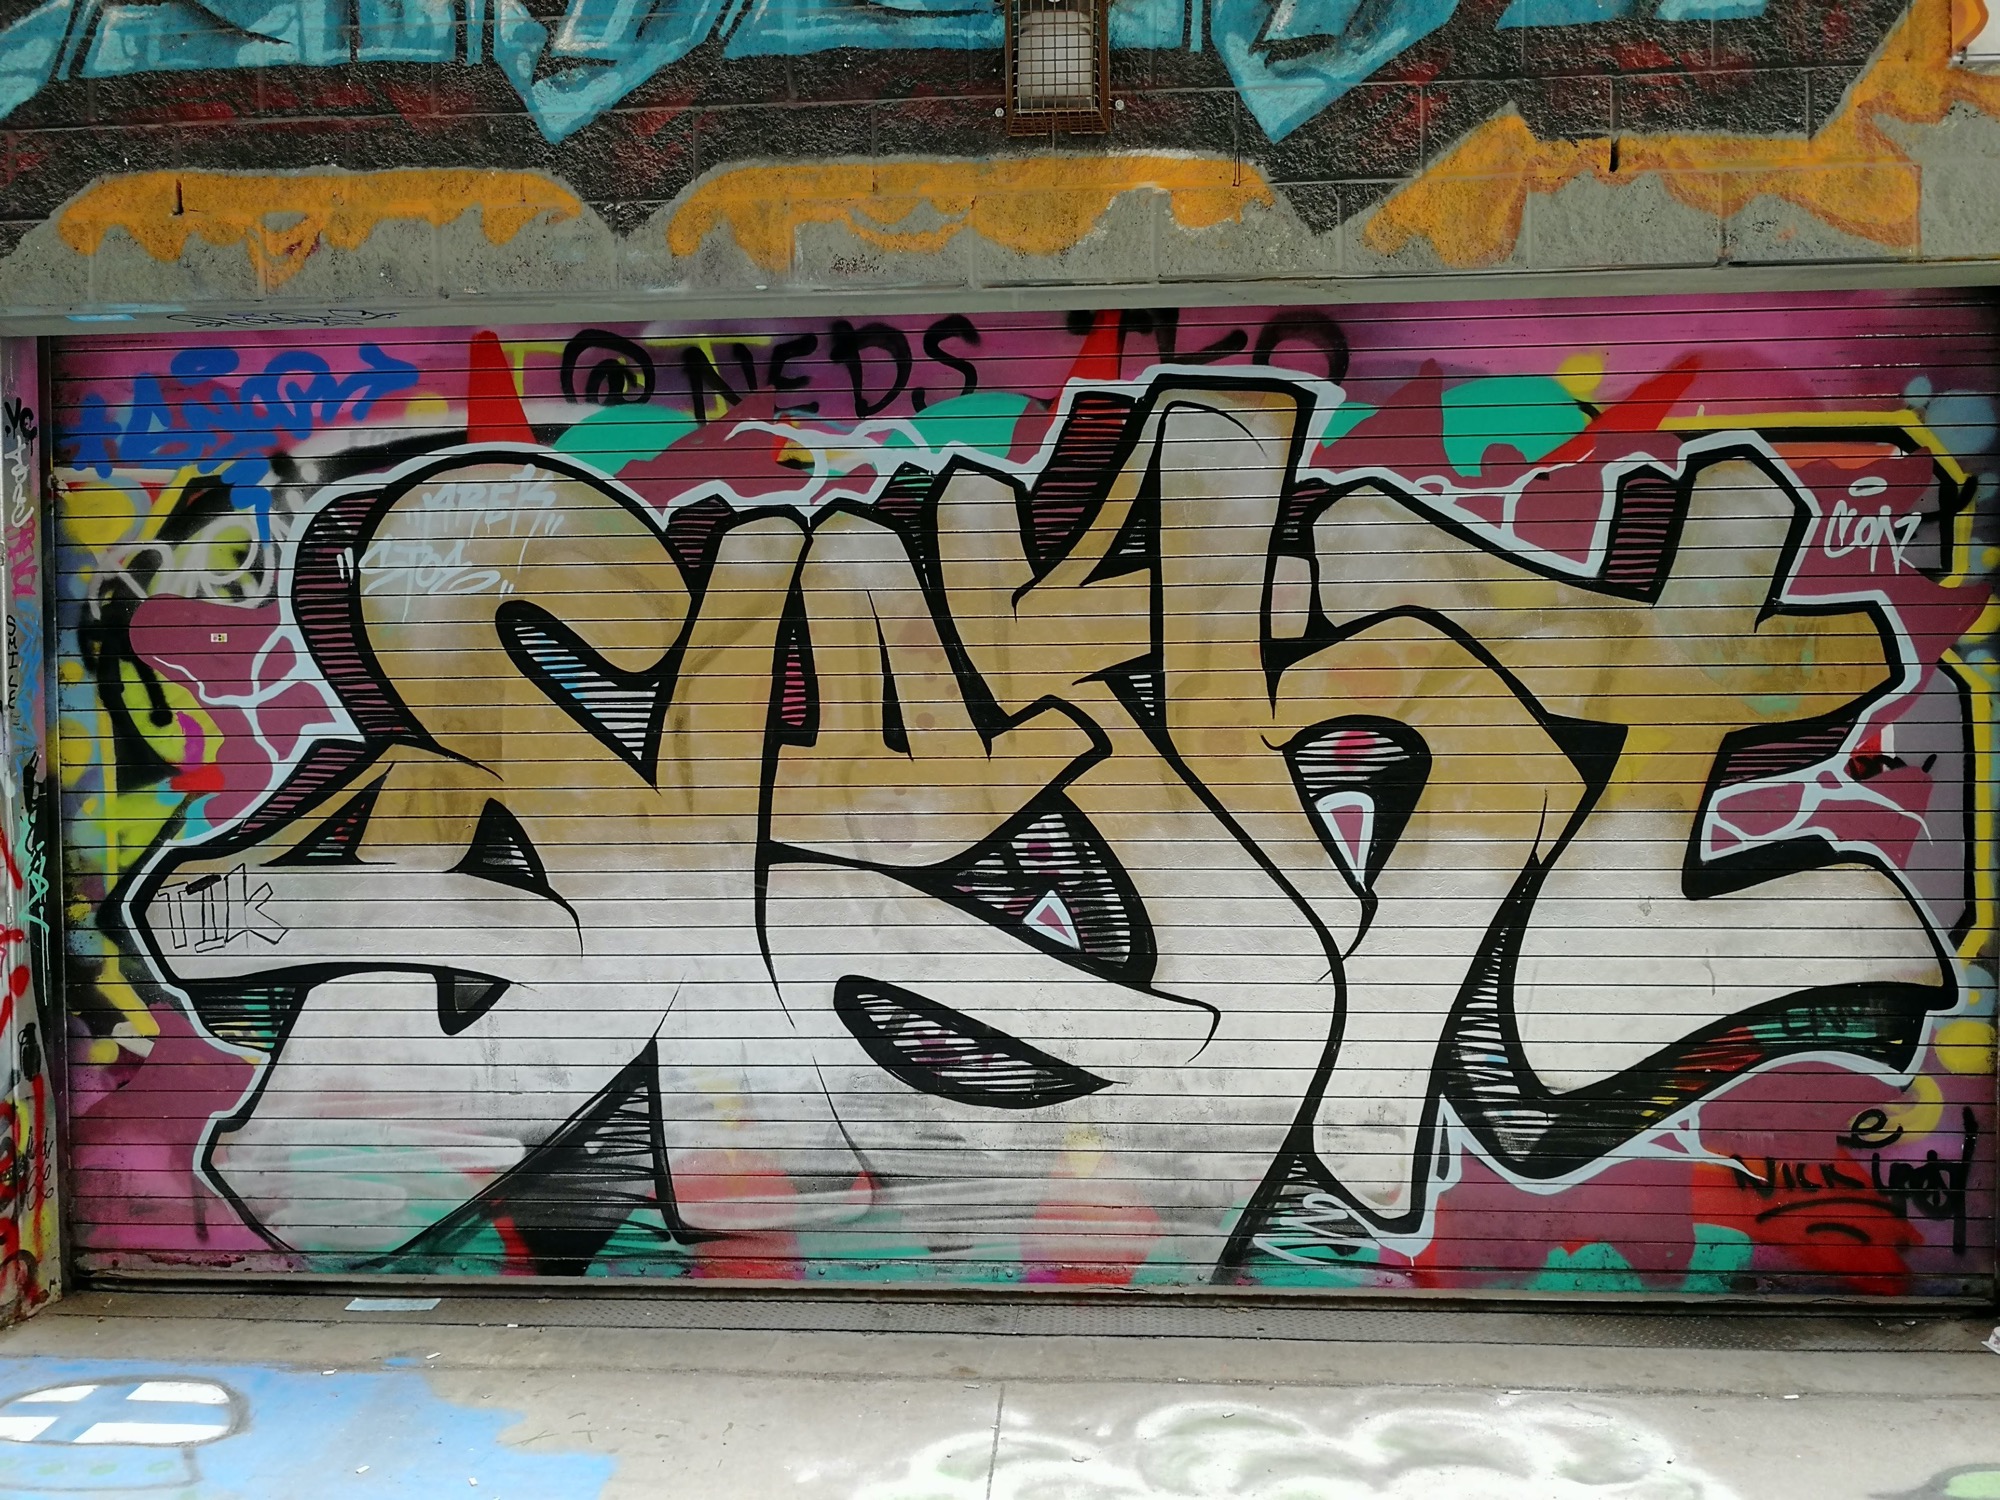 Graffiti 2574  captured by Rabot in Toronto Canada